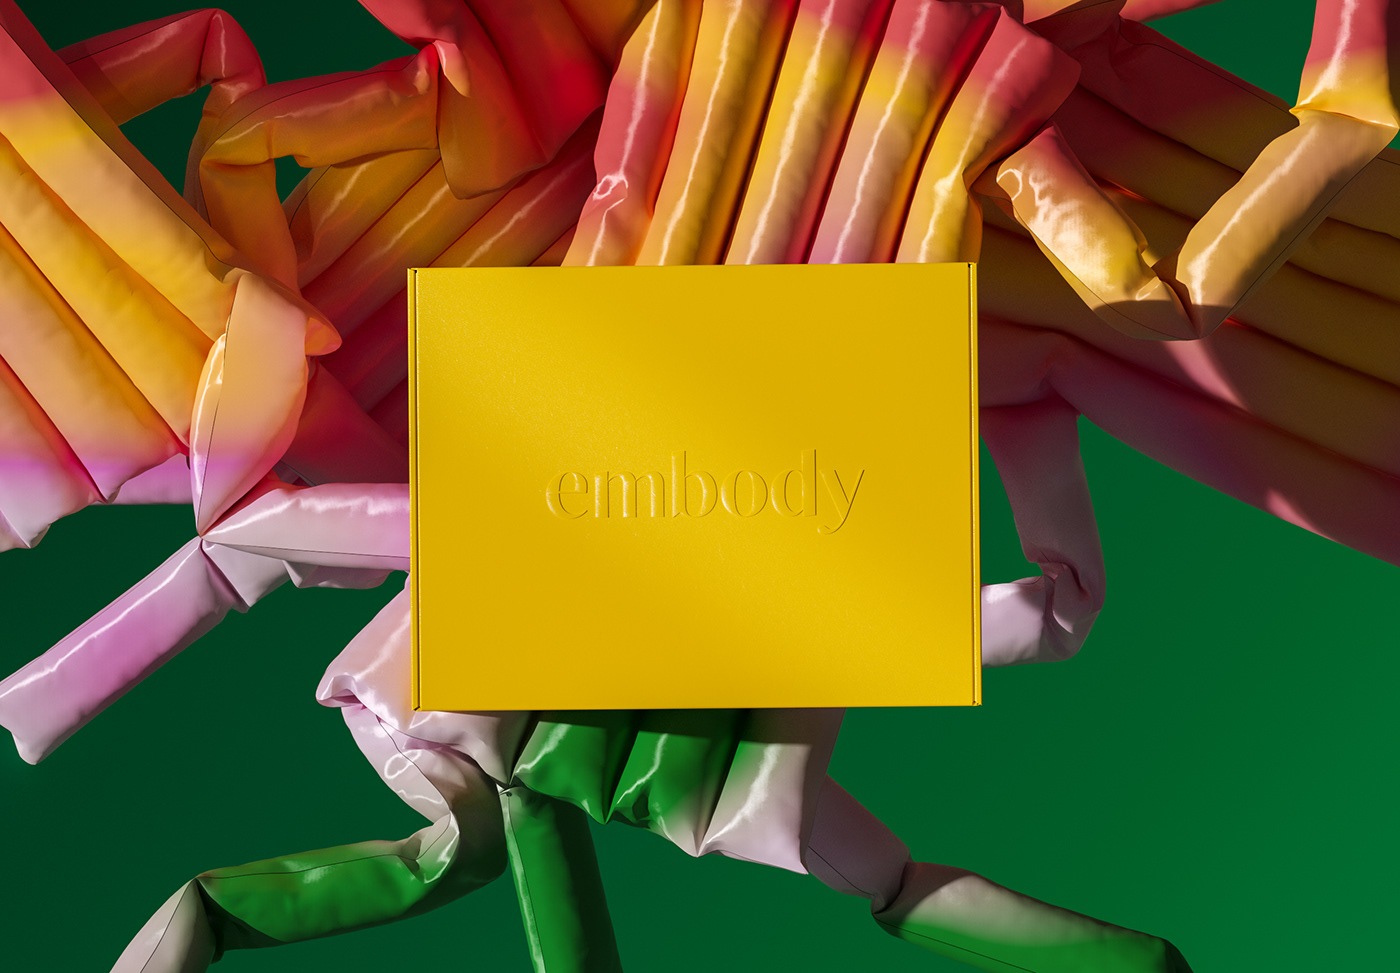 beauty bold brand identity branding  clean colorful minimal modern Packaging skincare